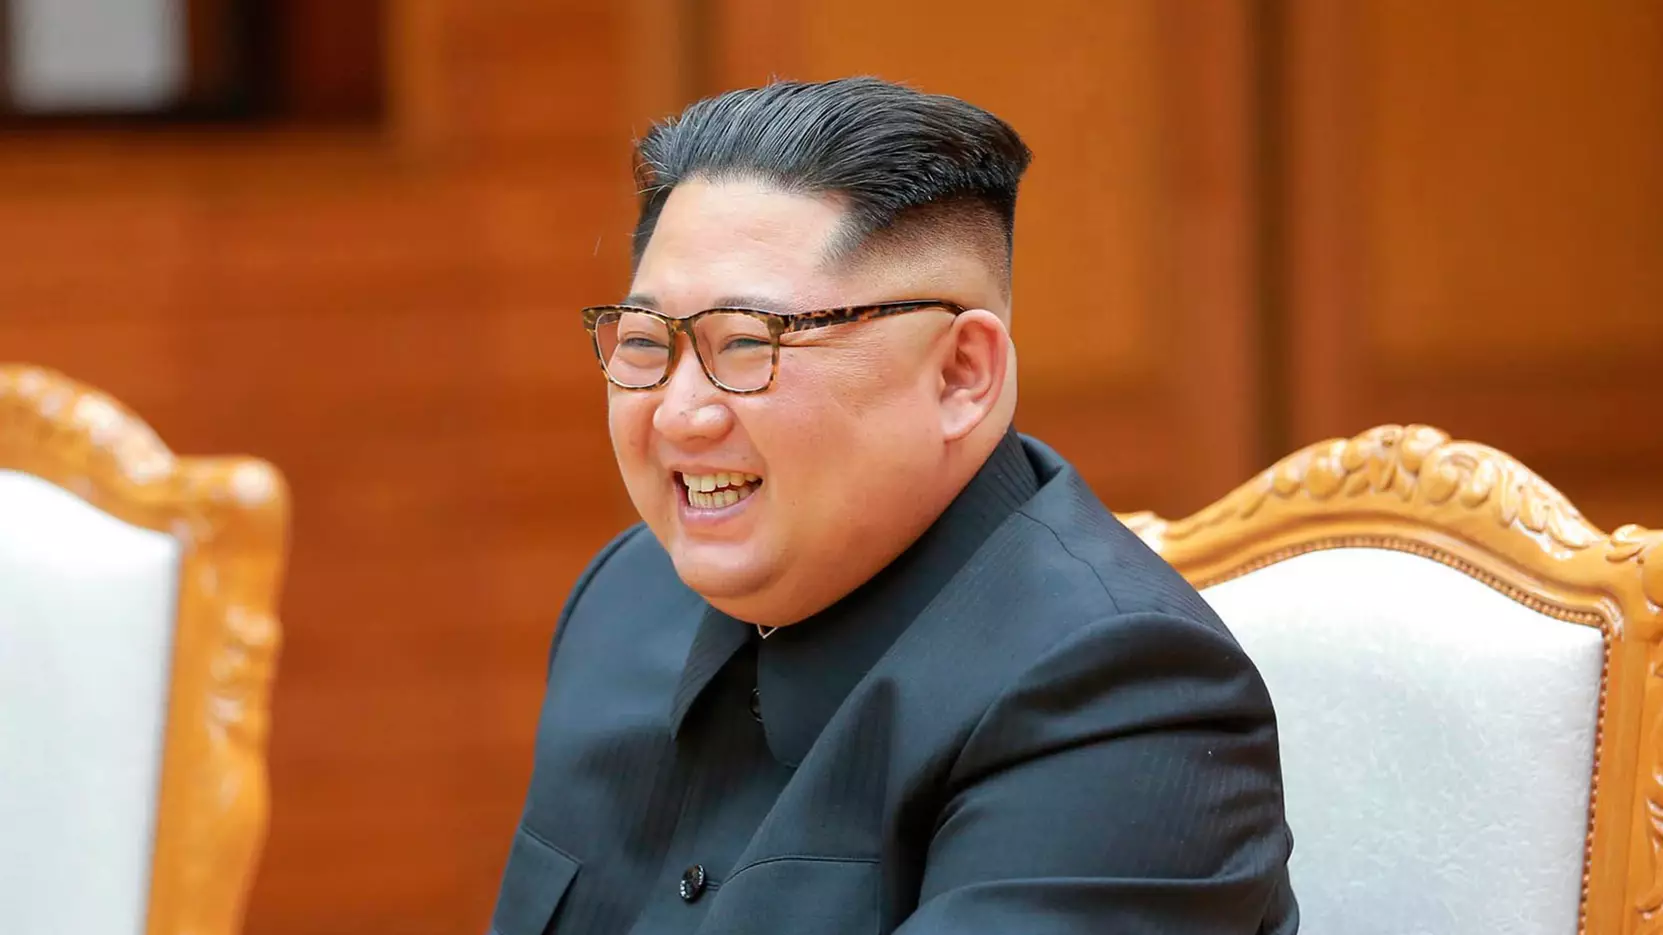 Russia TV Station Accused Of Photoshopping Image Of Kim Jong-Un Smiling